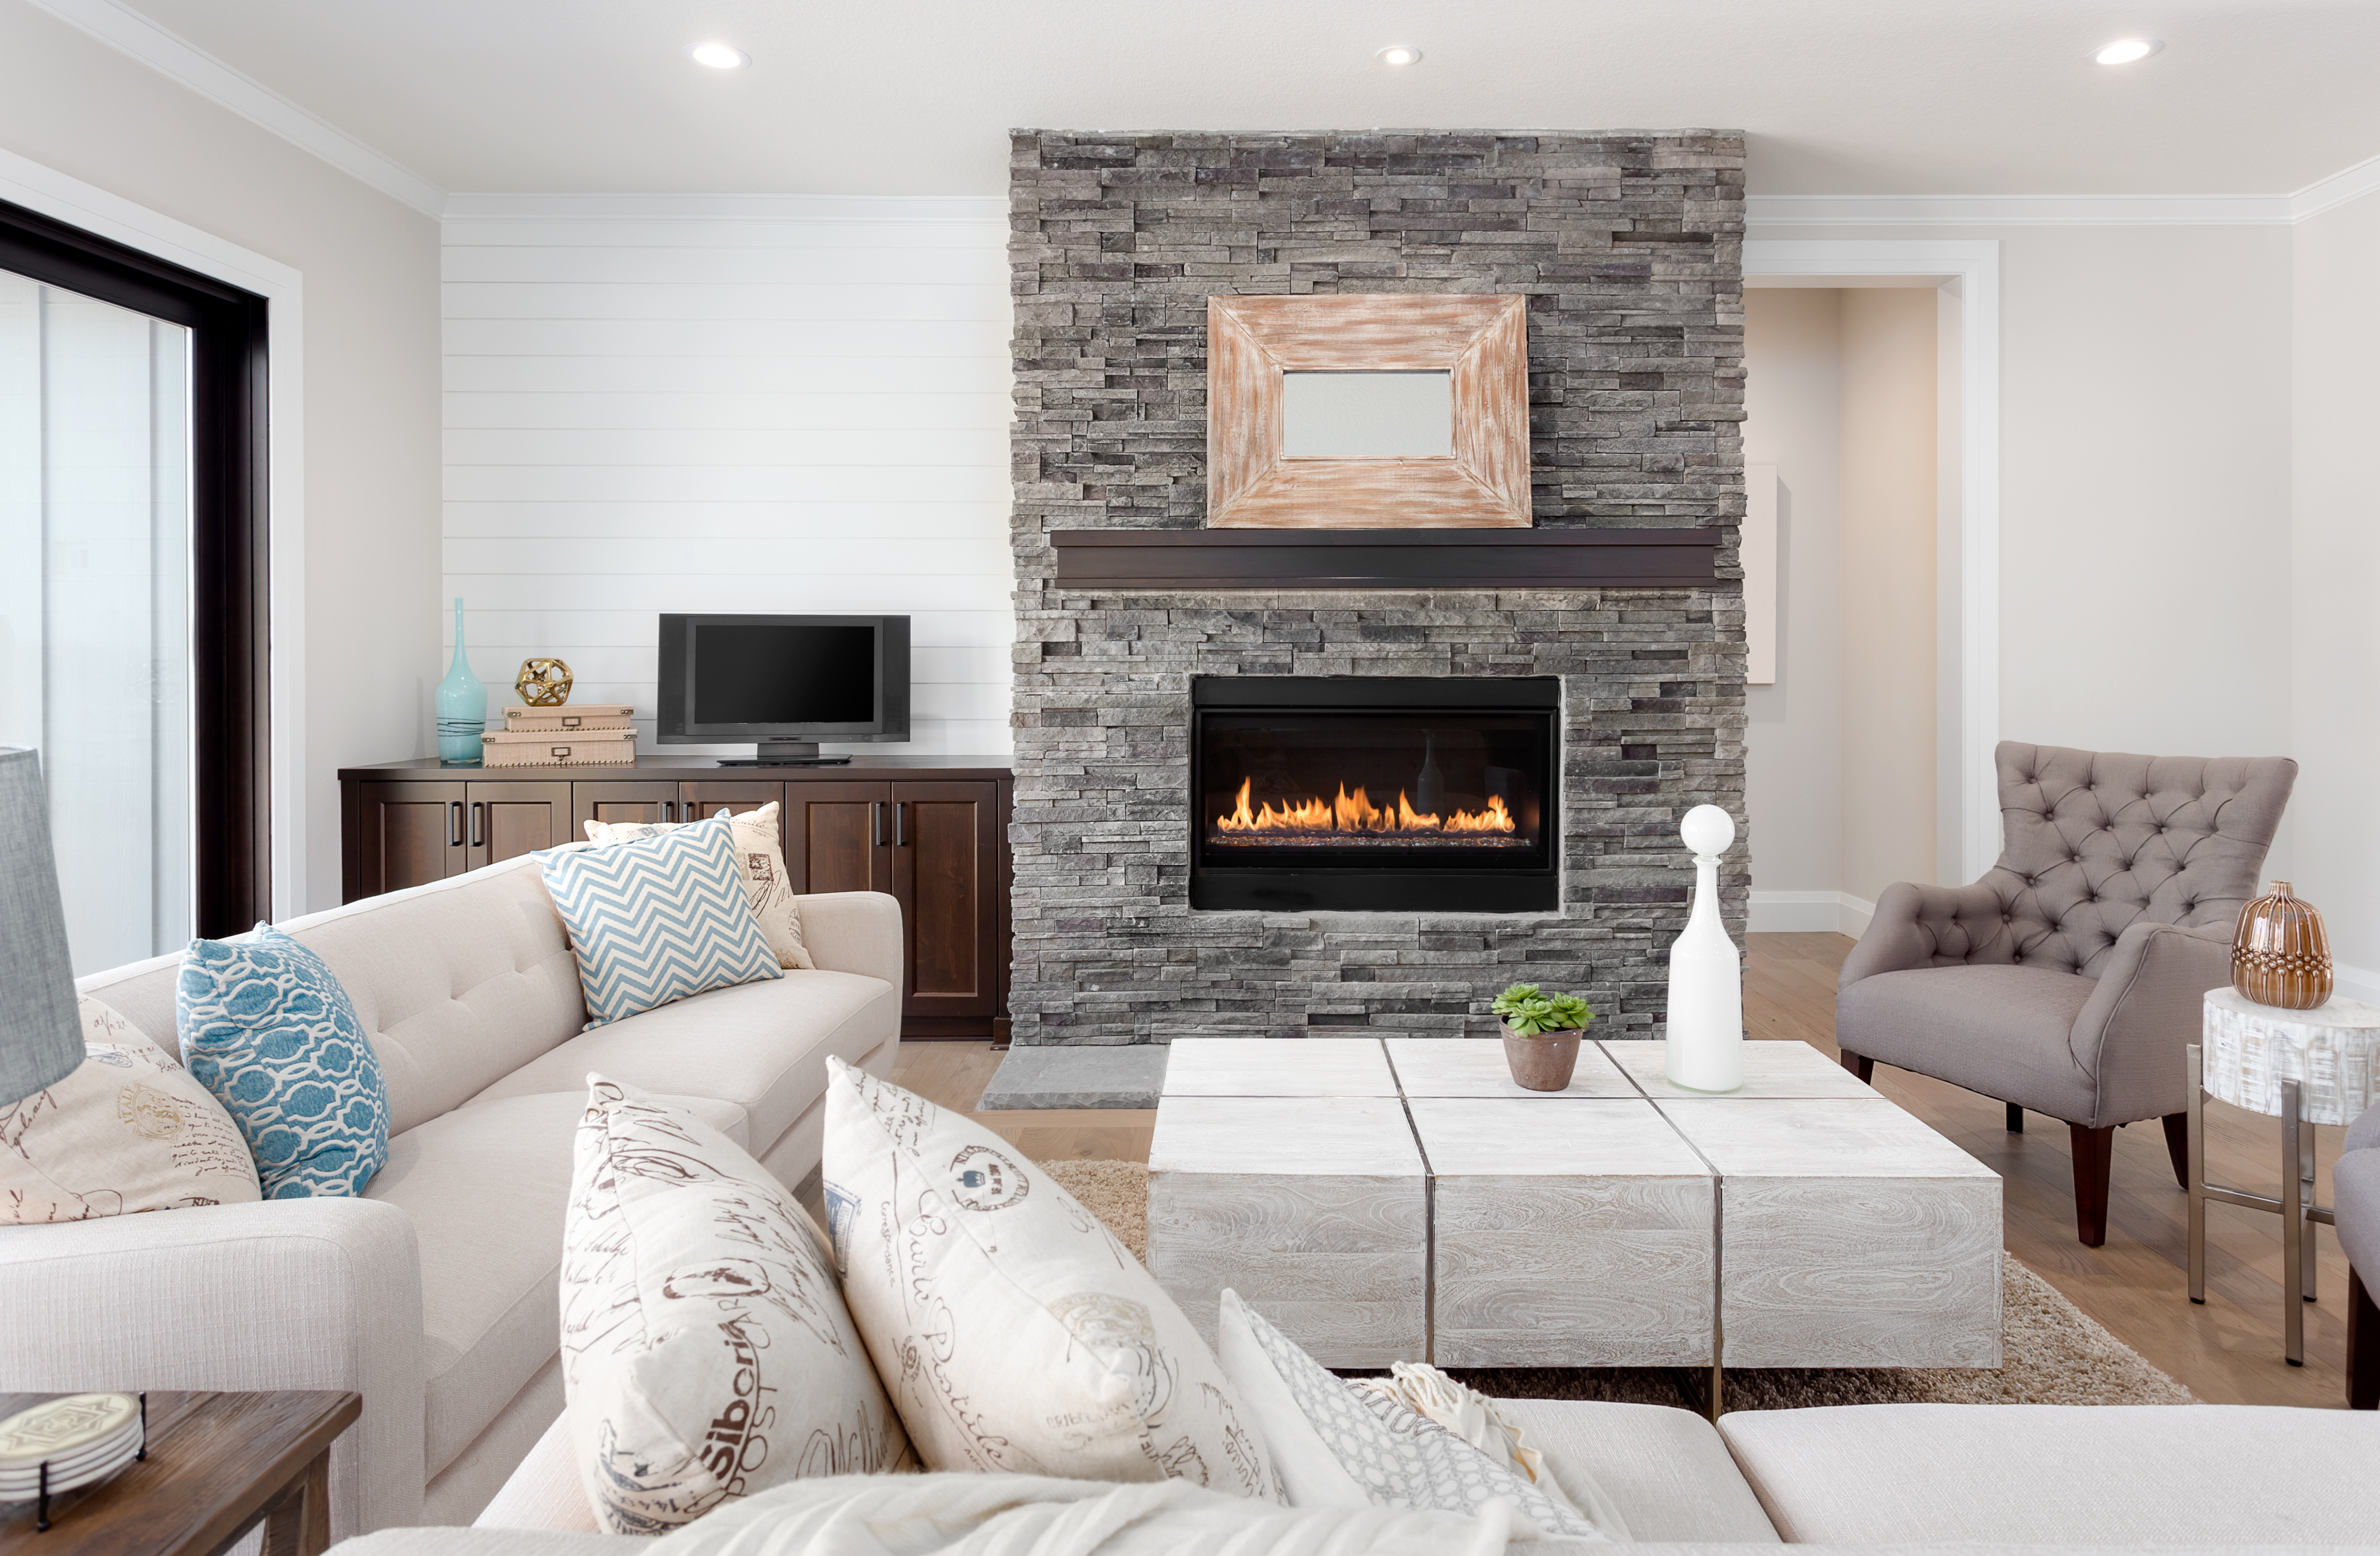 Living room with fireplace insert